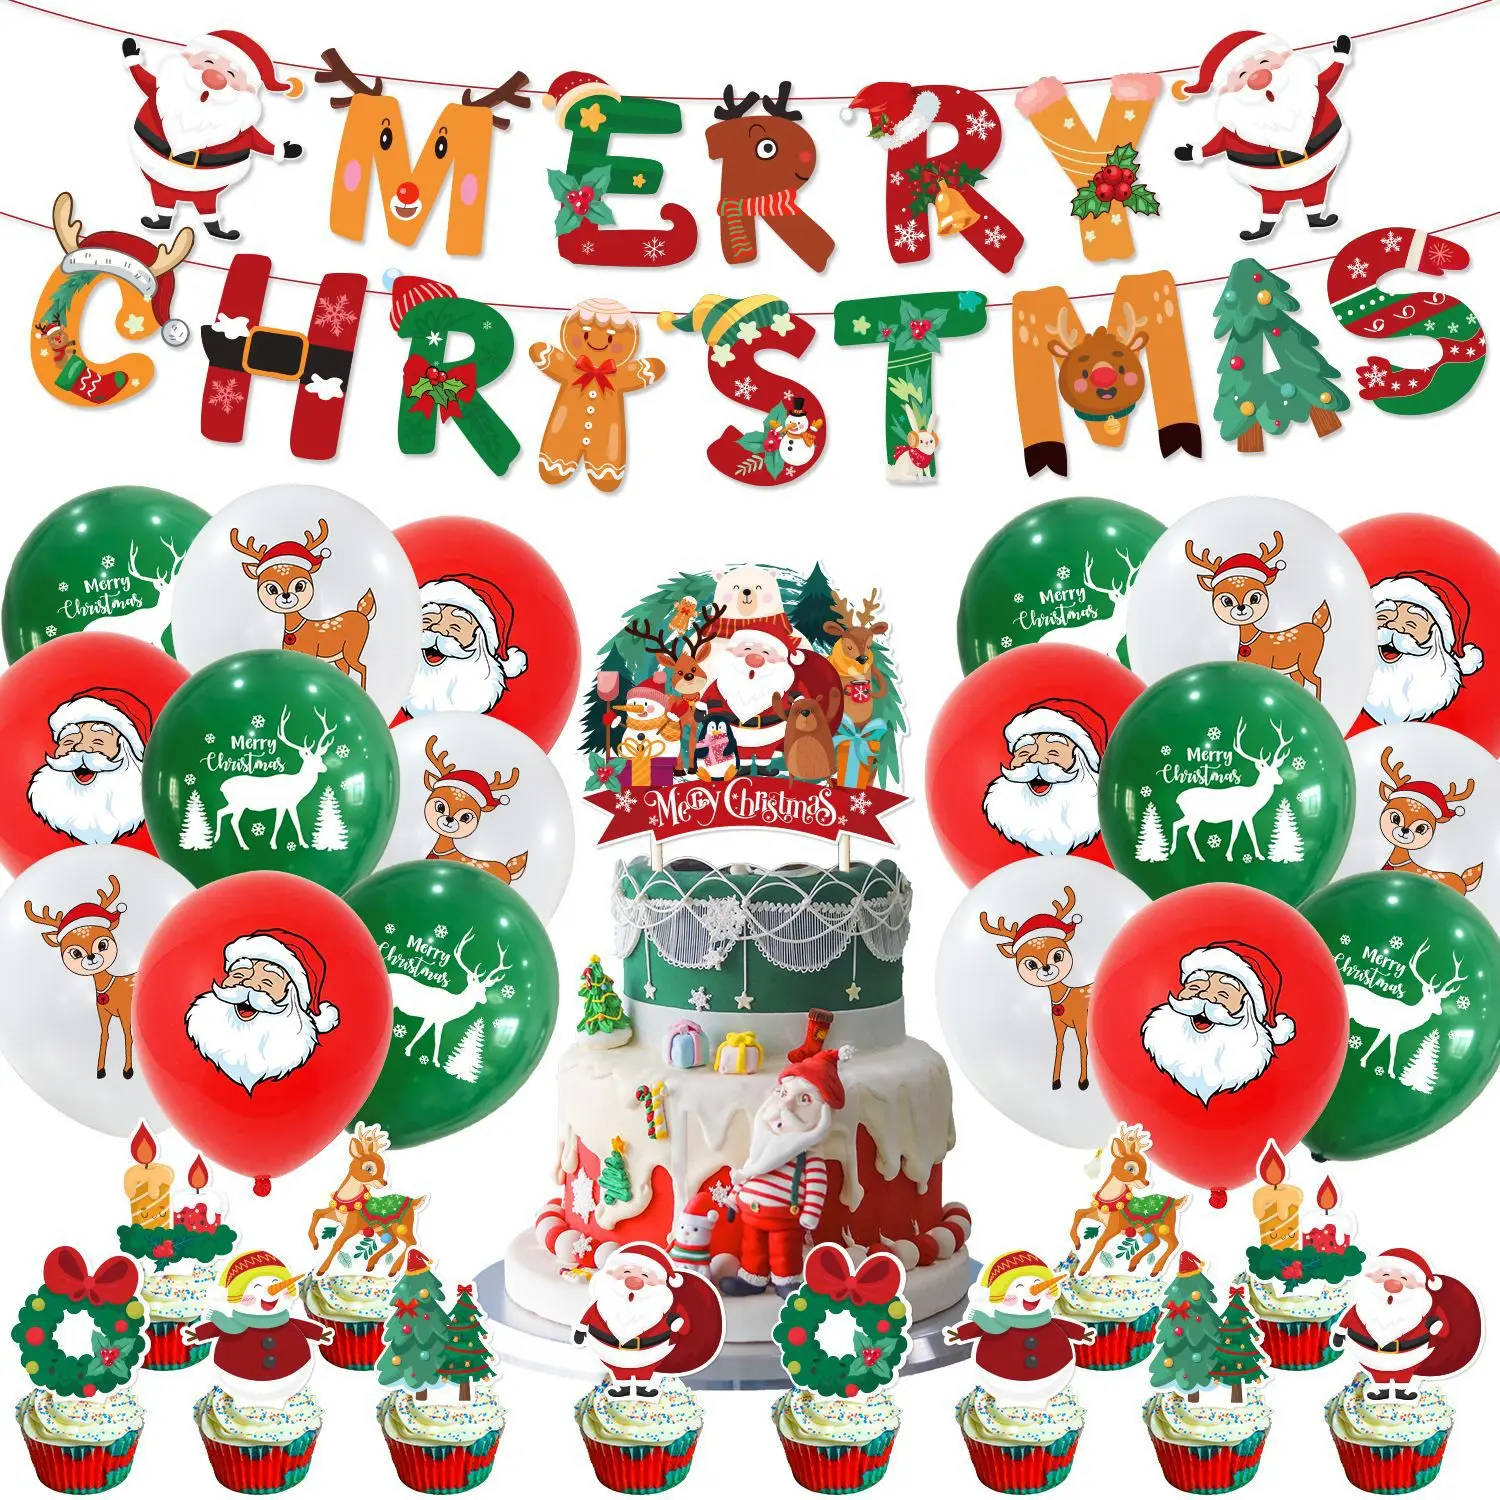 

47pcs/set Christmas Party Decoration Merry Christmas Balloon with Xmas Banner, 12inch Latex Balloons, Santa Claus Cake Inserts